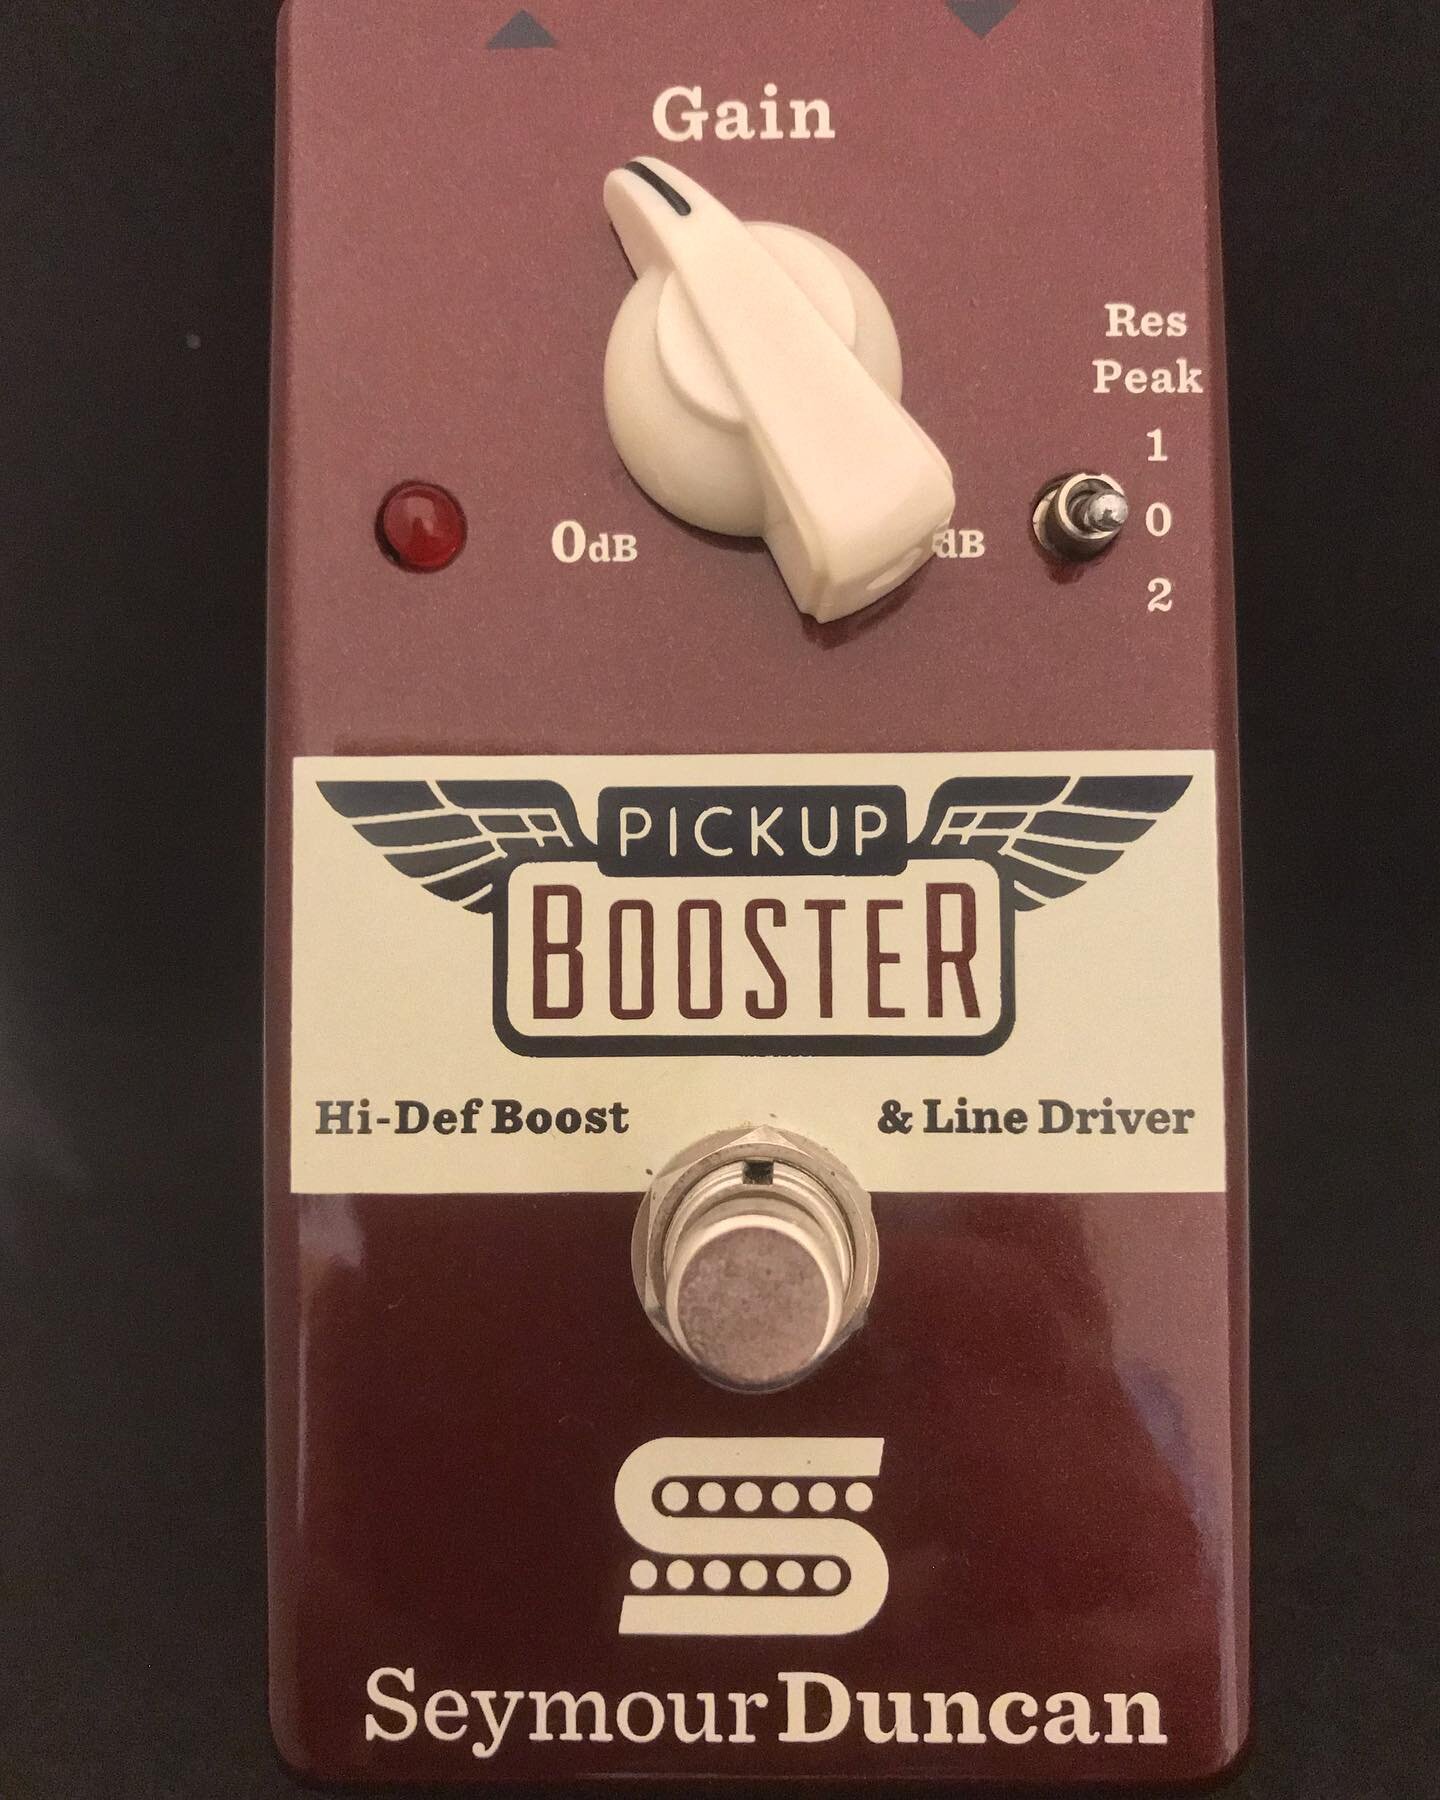 Seymour Duncan Pick Up Booster 🔥🔥🔥
&bull;
&bull;
A true-bypass pedal with class A, low-noise circuit design, Pickup Booster can be used to dial in the tone you need for every situation. It is exceptional at emphasizing a guitar's natural tone whil